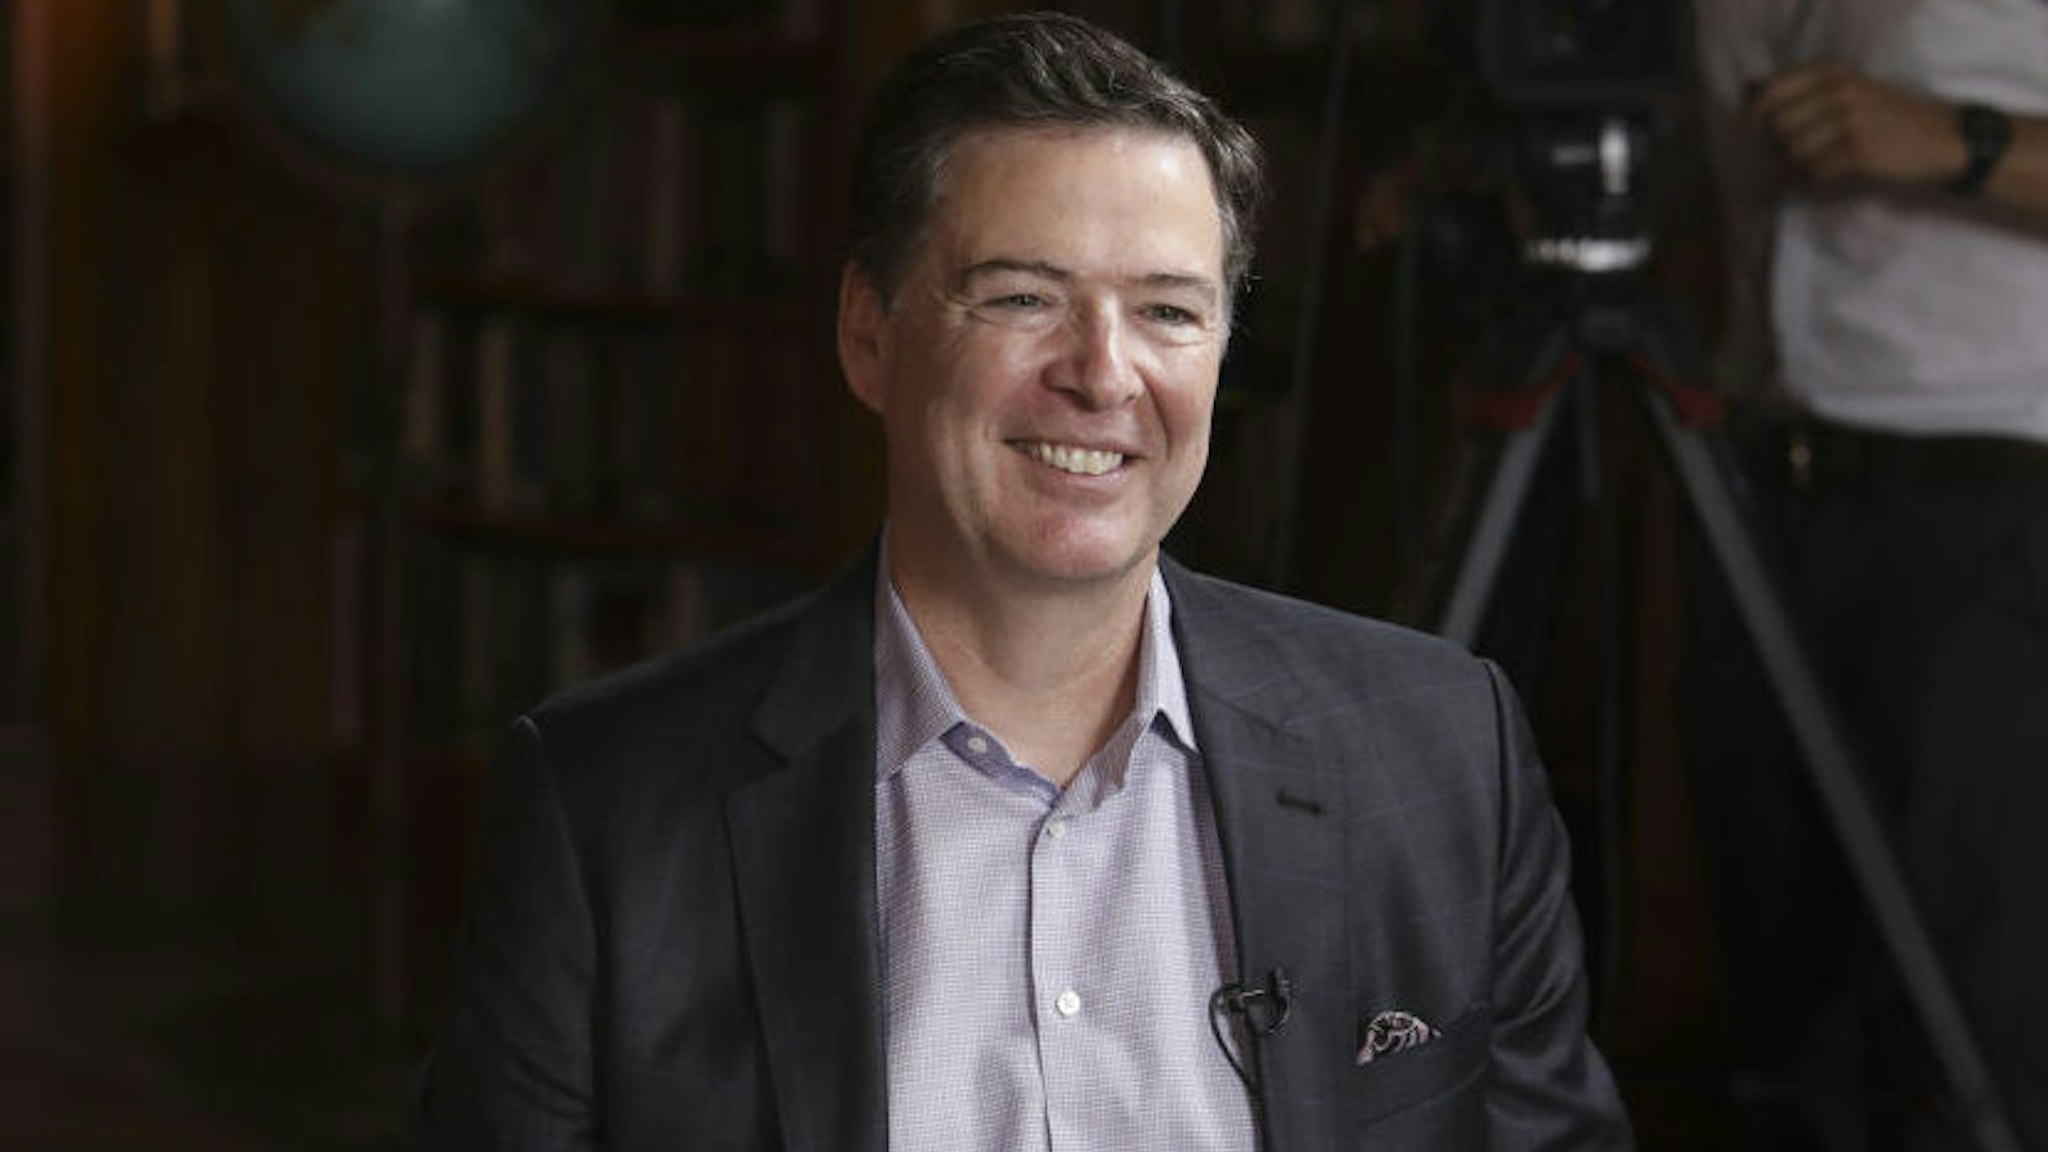 James Comey, former director of the Federal Bureau of Investigation (FBI), reacts during a Bloomberg Television interview in Salzburg, Austria, on Friday, June 21, 2019. Comey said he hopes President Donald Trump isn’t impeached because "that would let the American people off the hook."